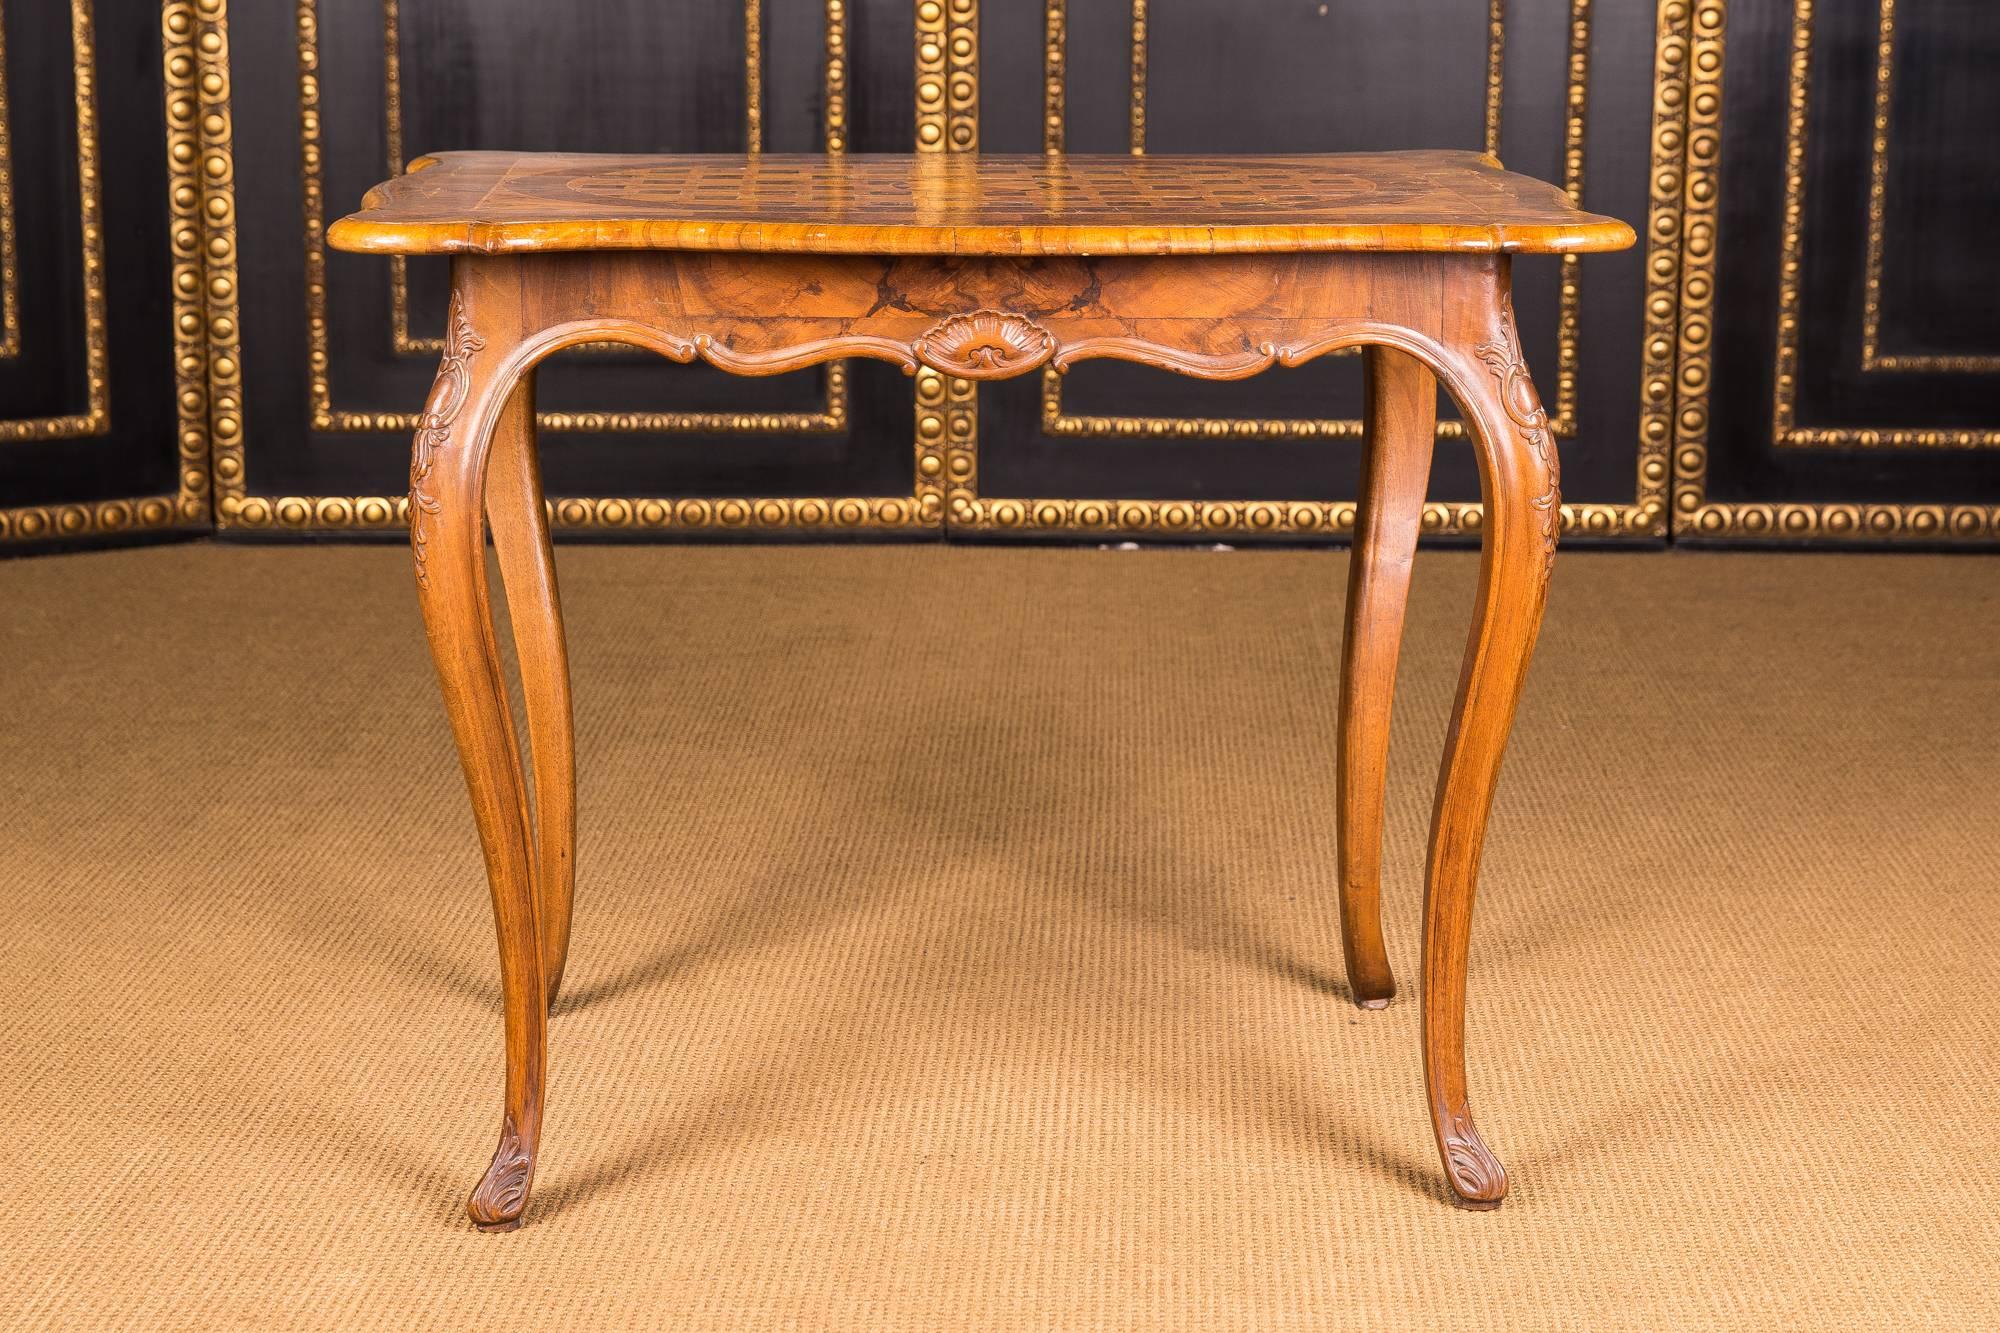 Solid walnut. Overhanging top plate, underneath the body, on a high, elegant curved legs. The whole corpus is veneered with inlaid, different precious woods as inlays.

Please take a look at the detailed pictures.

Excellent warm patina aged over